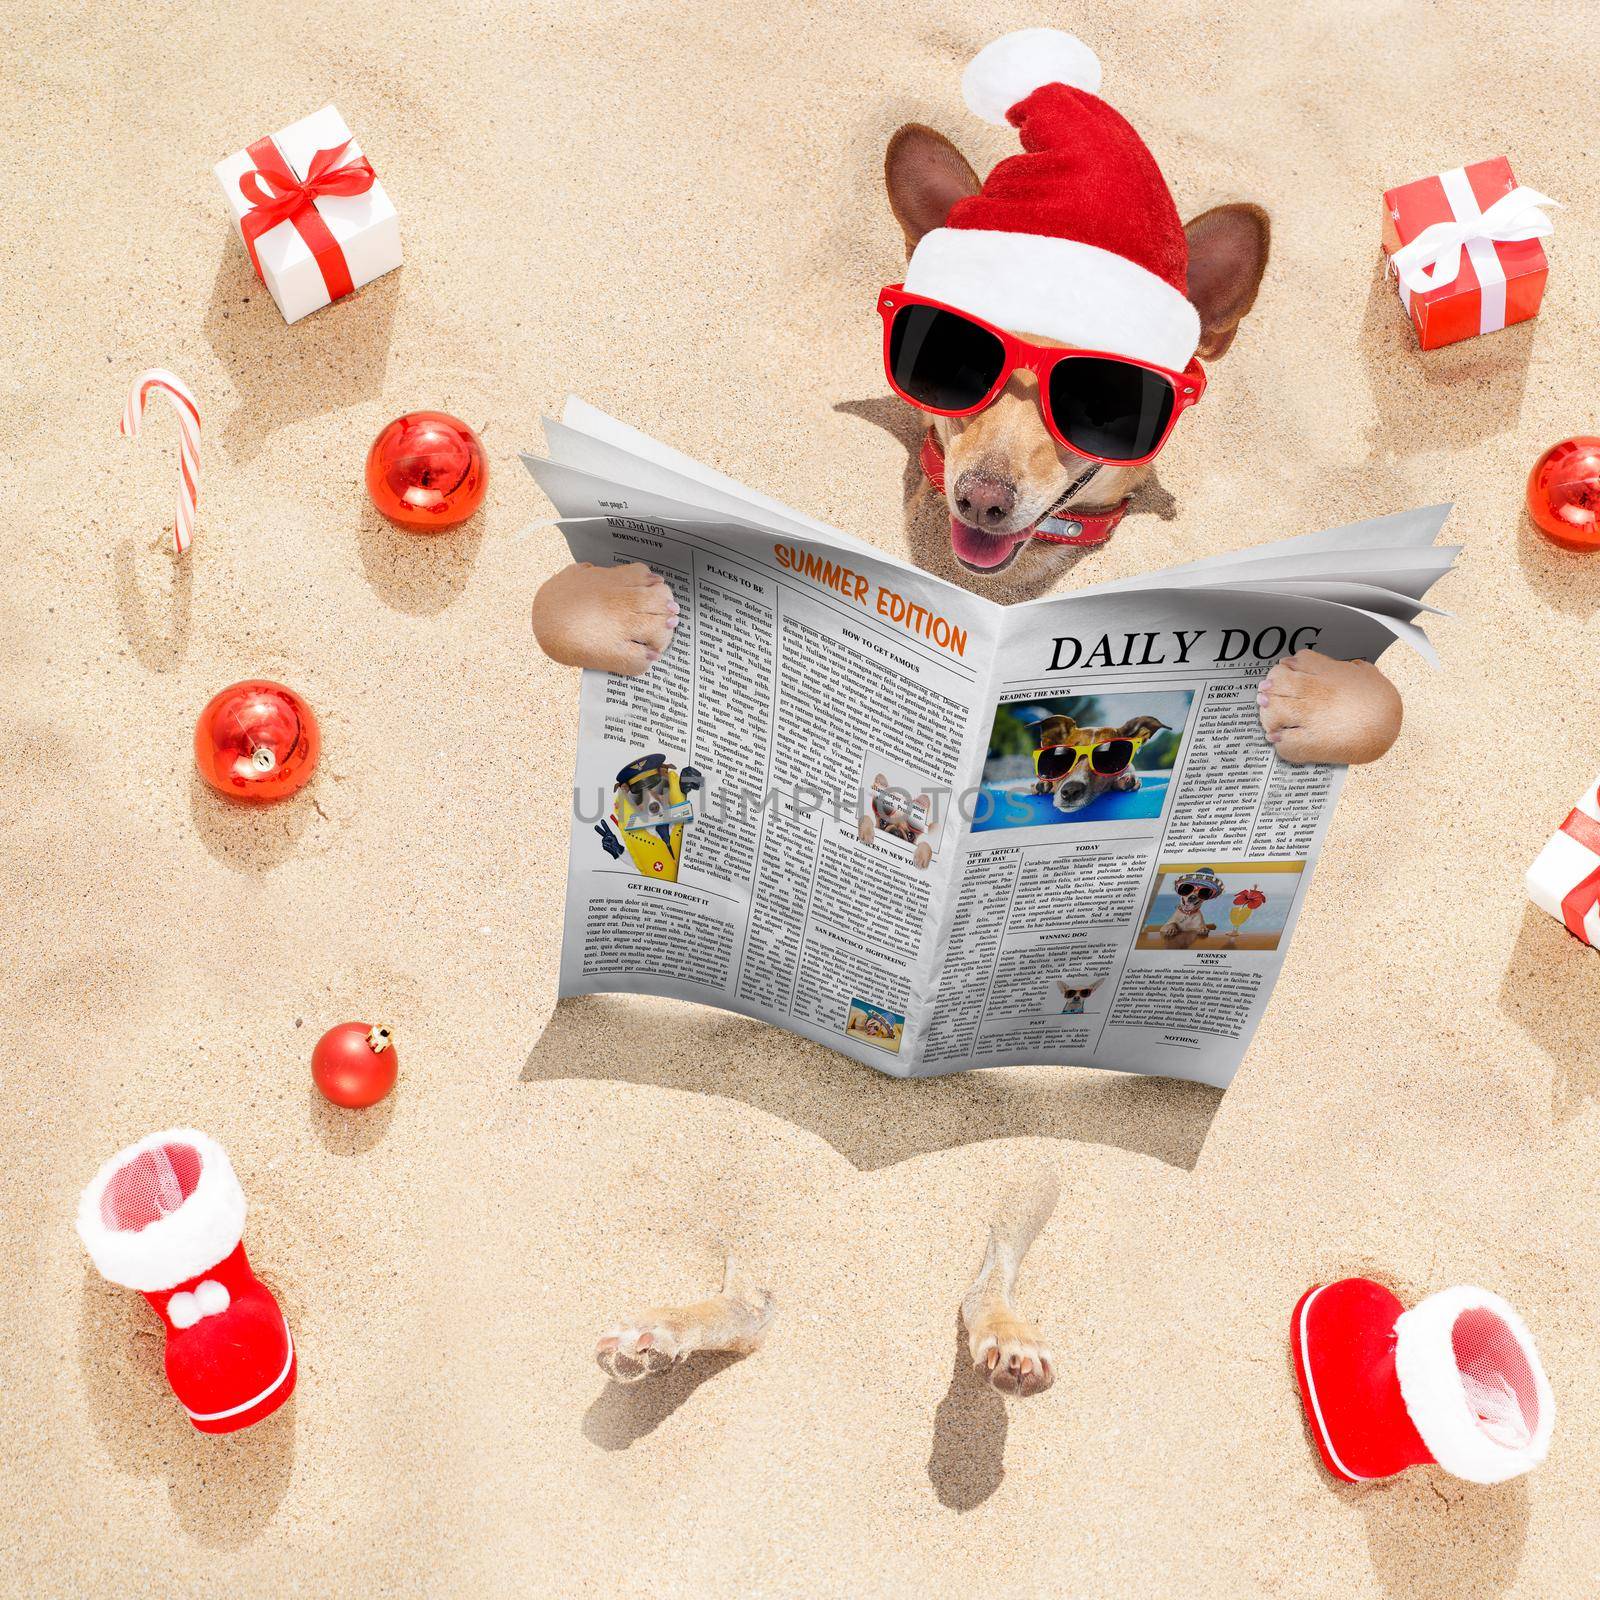 chihuahua dog  buried in the sand at the beach on  vacation christmas holidays ,  in hot summer wearing red sunglasses, reading a newspaper or magazine